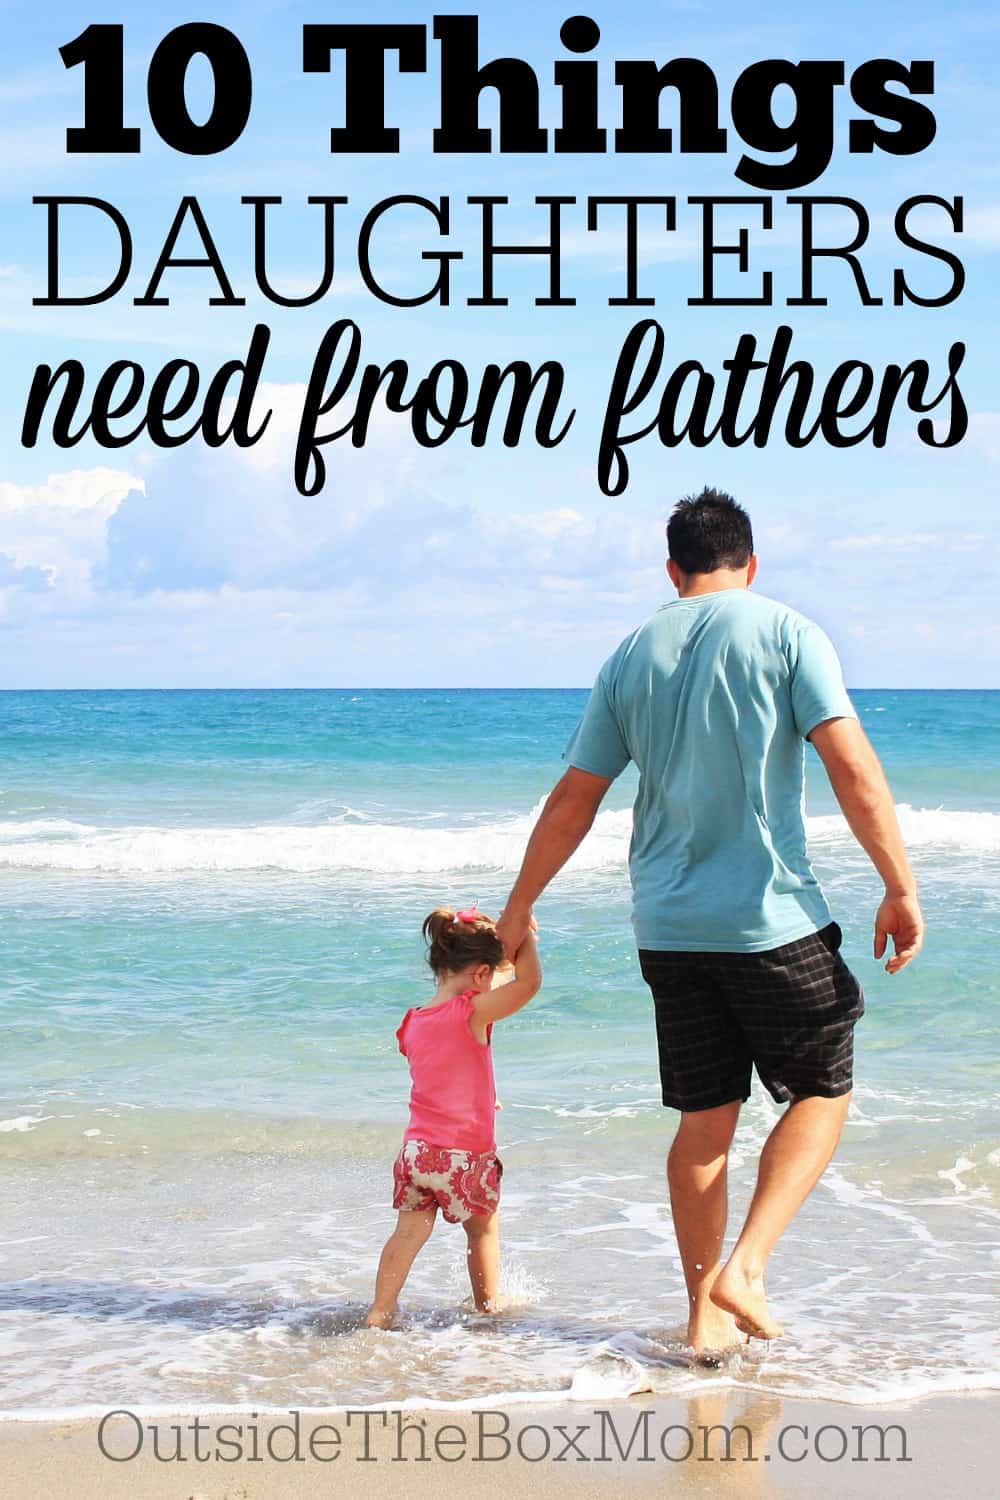 The relationship that matters most to your daughter is the one with her father. Her self-esteem, choices, behavior, character, and ideas about marriage are all directly tied to her dad - the most important representative to her of the male species.